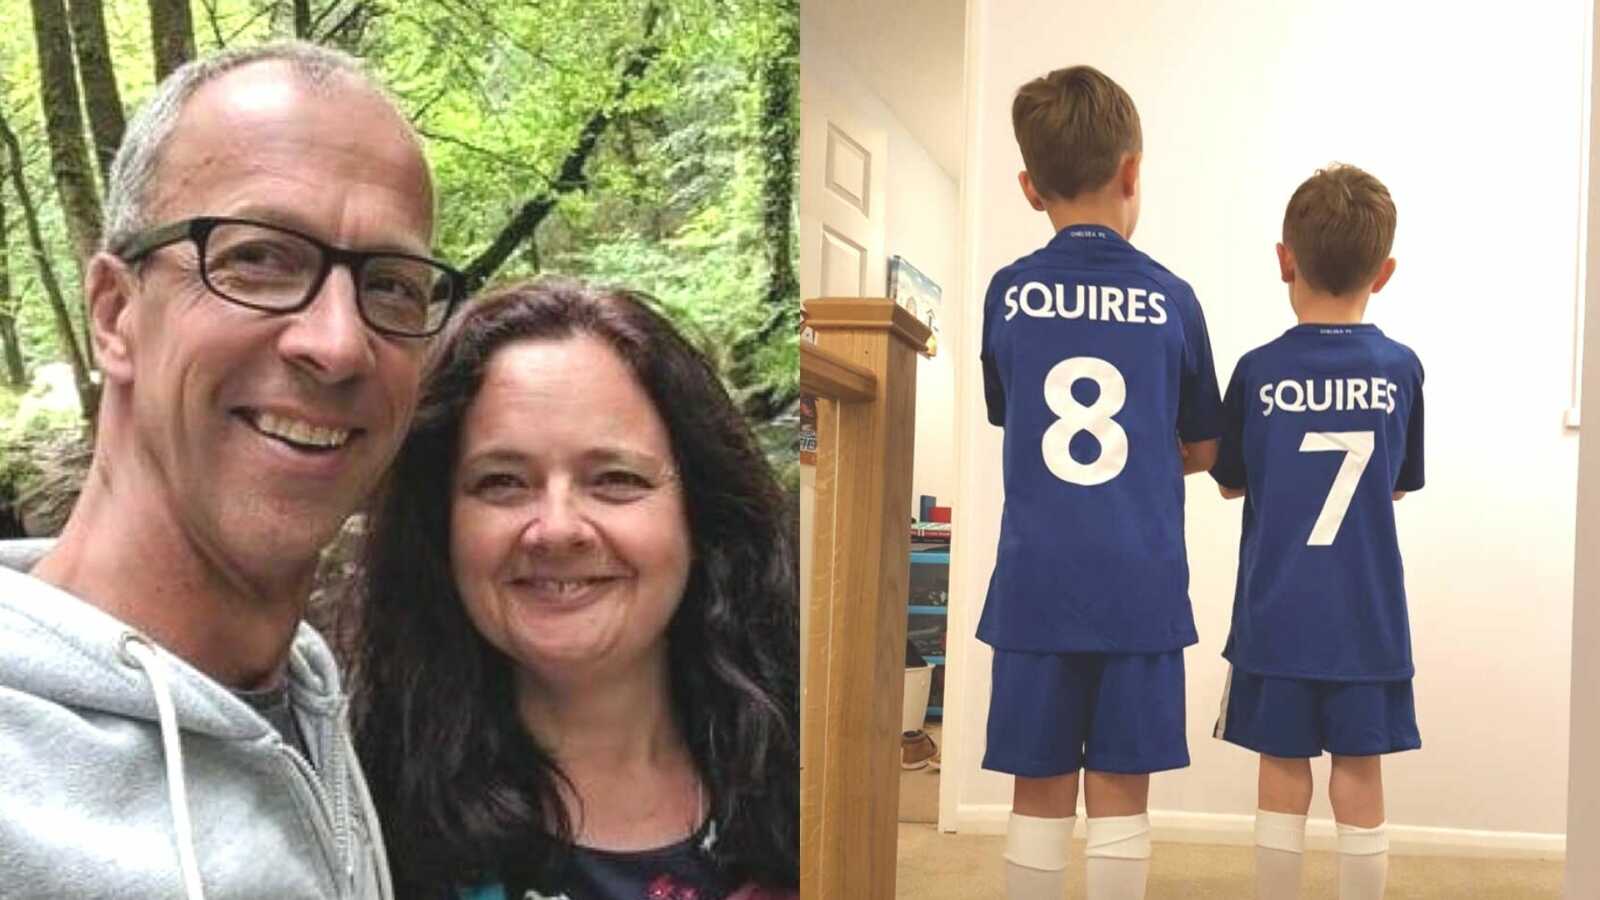 adoptive parents and their sons wearing soccer jerseys